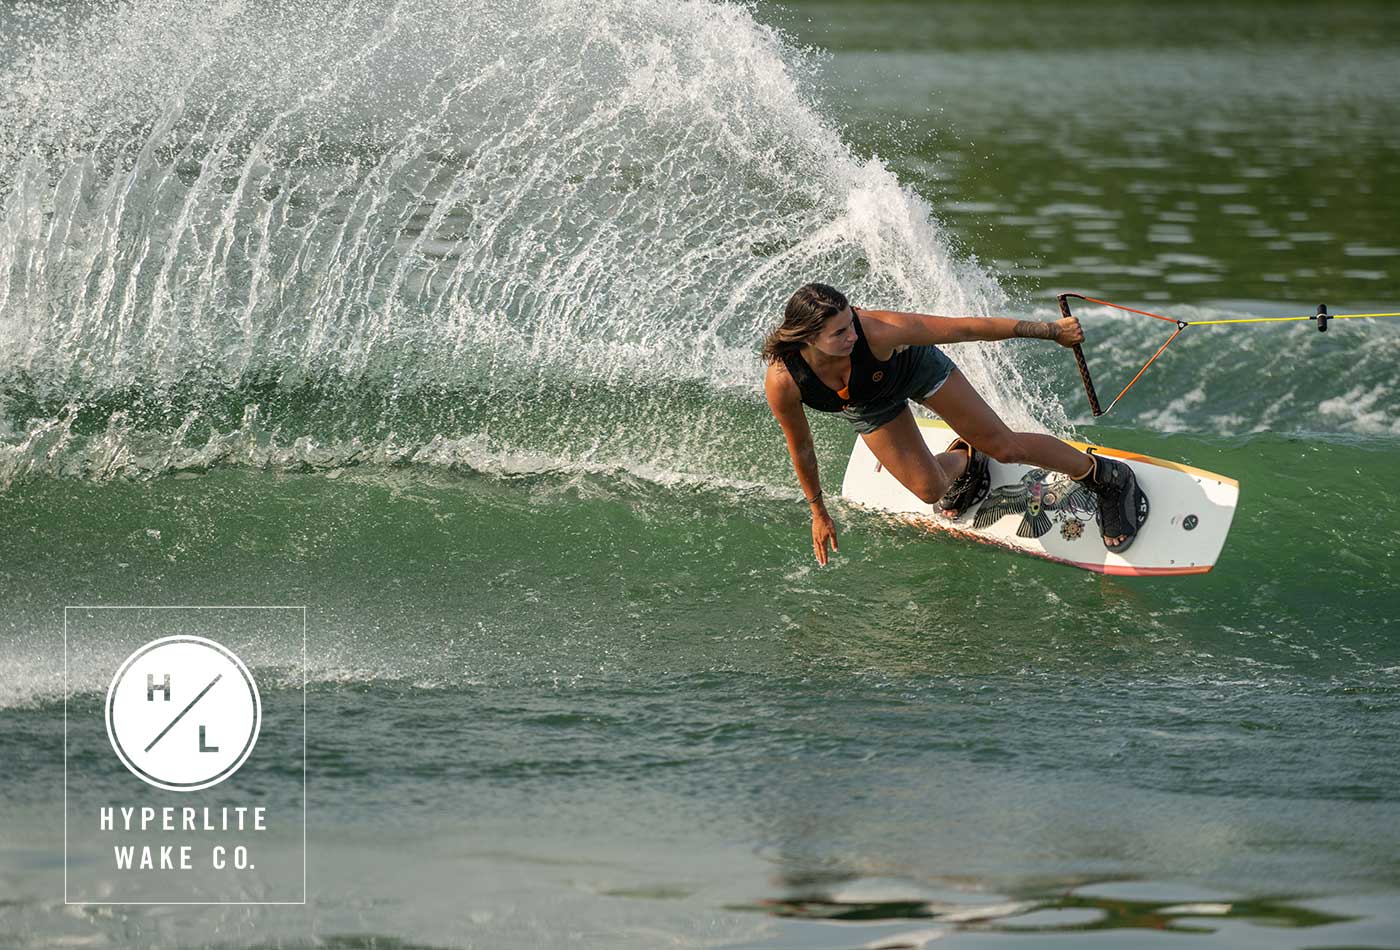 Take your wake riding to new heights with the extra pop and secure edging of the ultralight Hyperlite Cadence Ladies Wakboard.